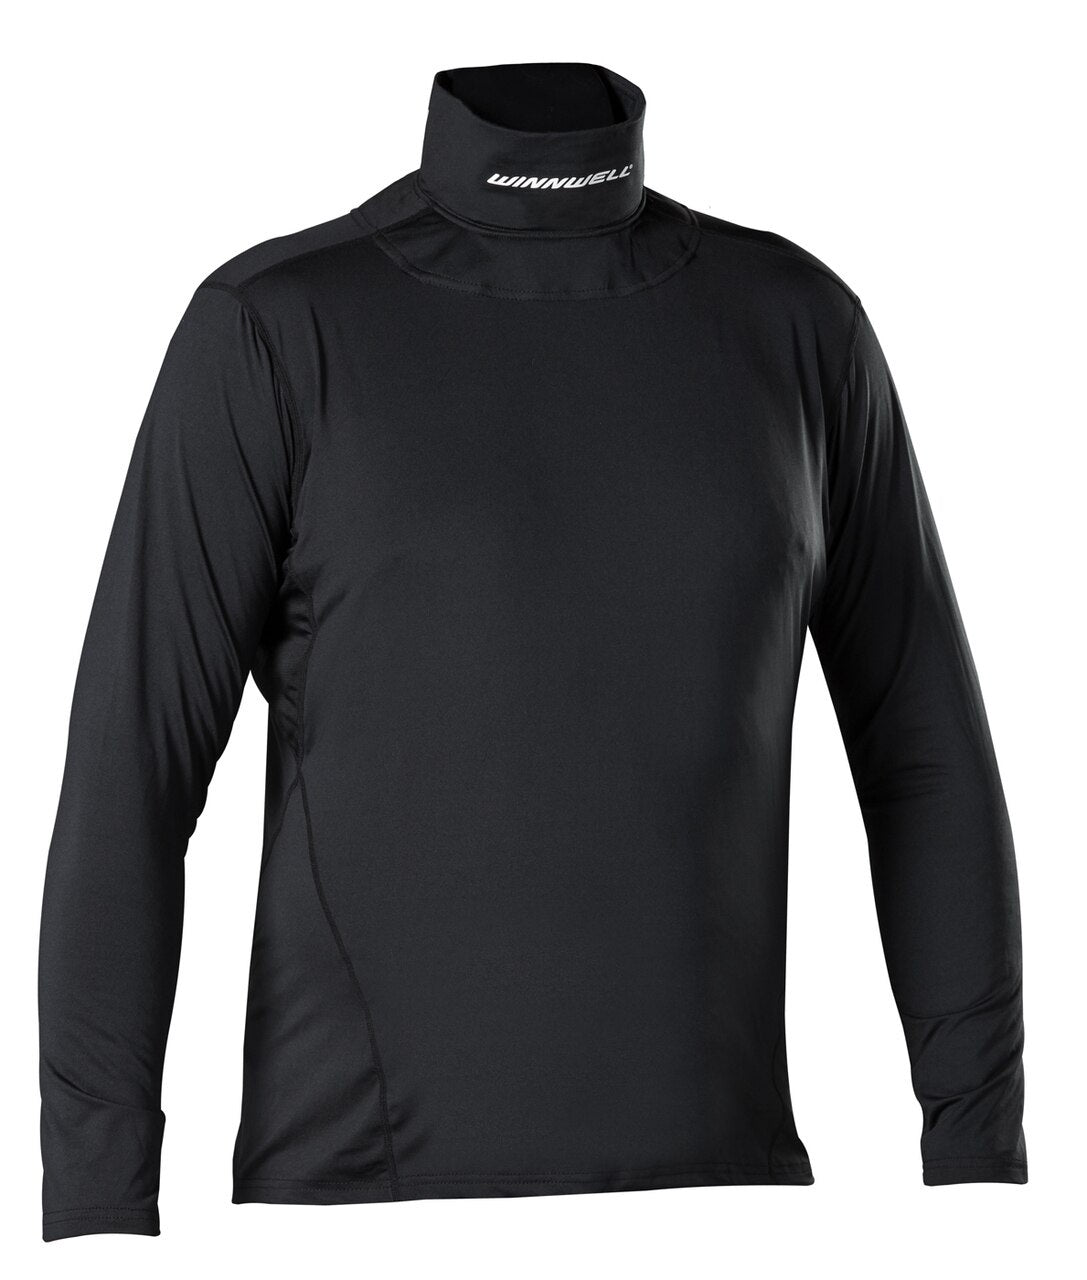 Winnwell Youth Long Sleeve Base Layer with Neck Guard